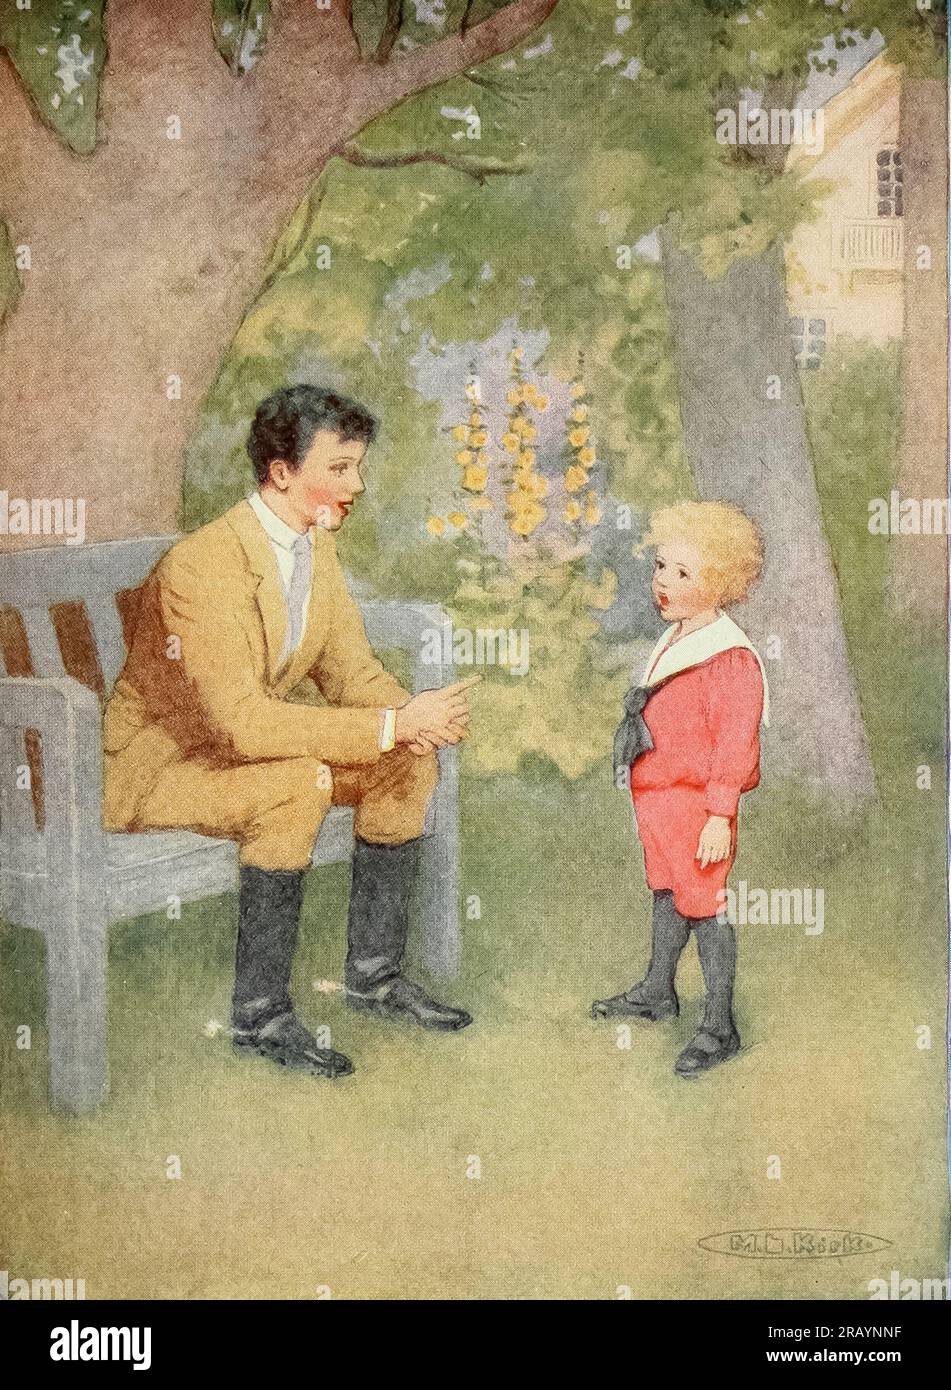 Come, I'll say it and you must learn it by heart illustrated by Maria L. Kirk from the book ' Dora ' by Spyri, Johanna, 1827-1901 Publication date 1924 Publisher Philadelphia & London, J.B. Lippincott Johanna Louise Spyri (12 June 1827 – 7 July 1901) was a Swiss author of novels, notably children's stories. She wrote the popular book Heidi. Born in Hirzel, a rural area in the canton of Zürich, as a child she spent several summers near Chur in Graubünden, the setting she later would use in her novels. Stock Photo